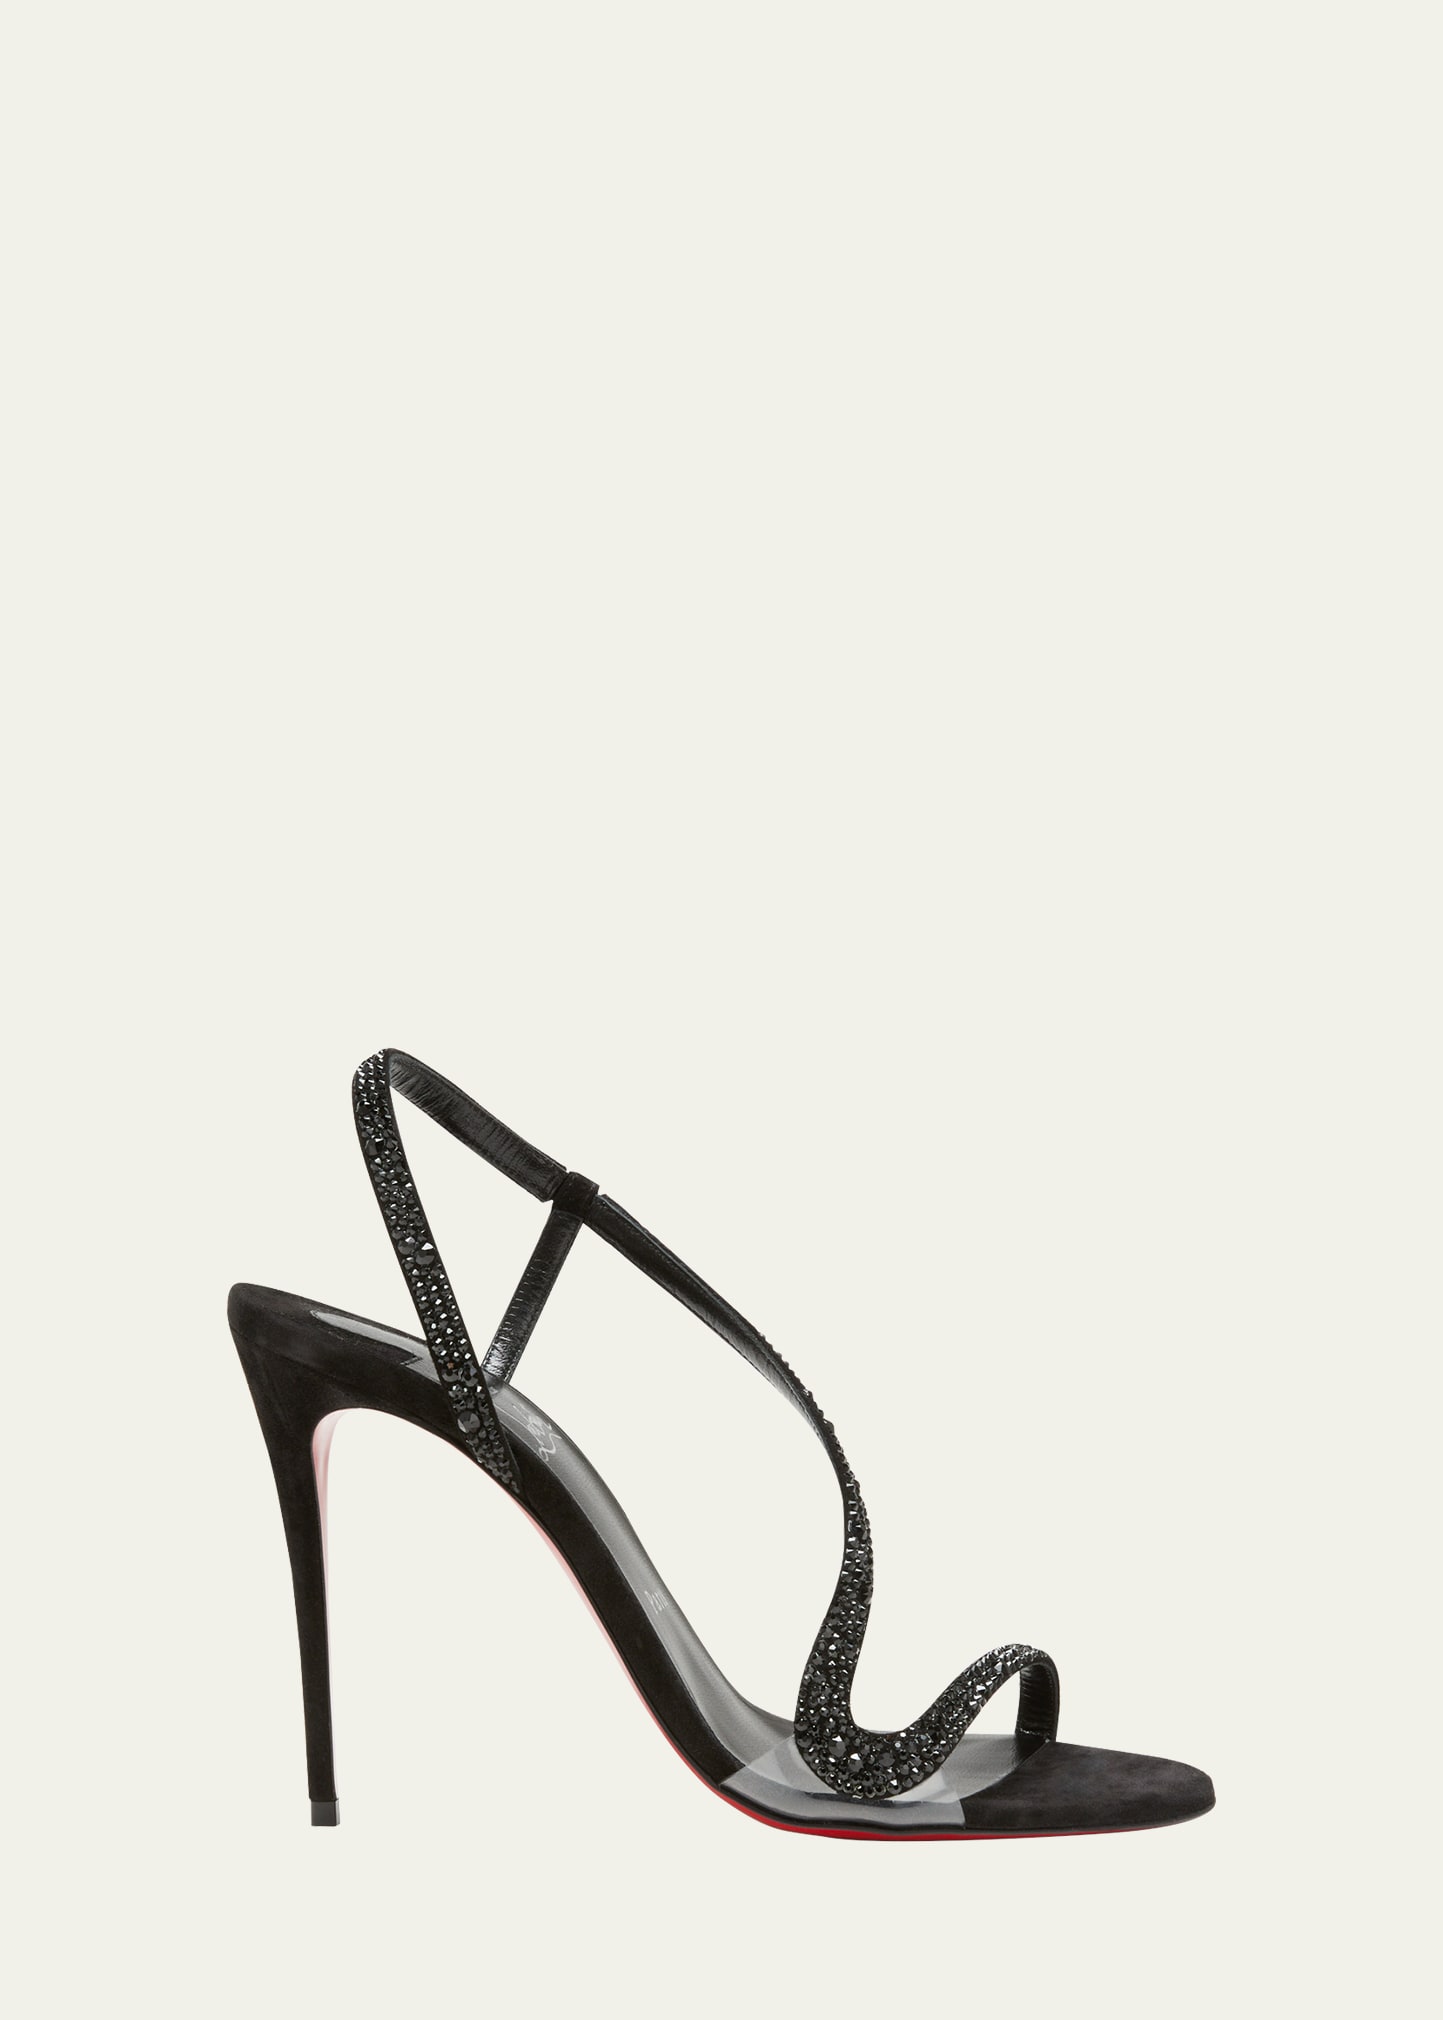 Christian Louboutin Rosalie Strass Red Sole Stiletto Sandals